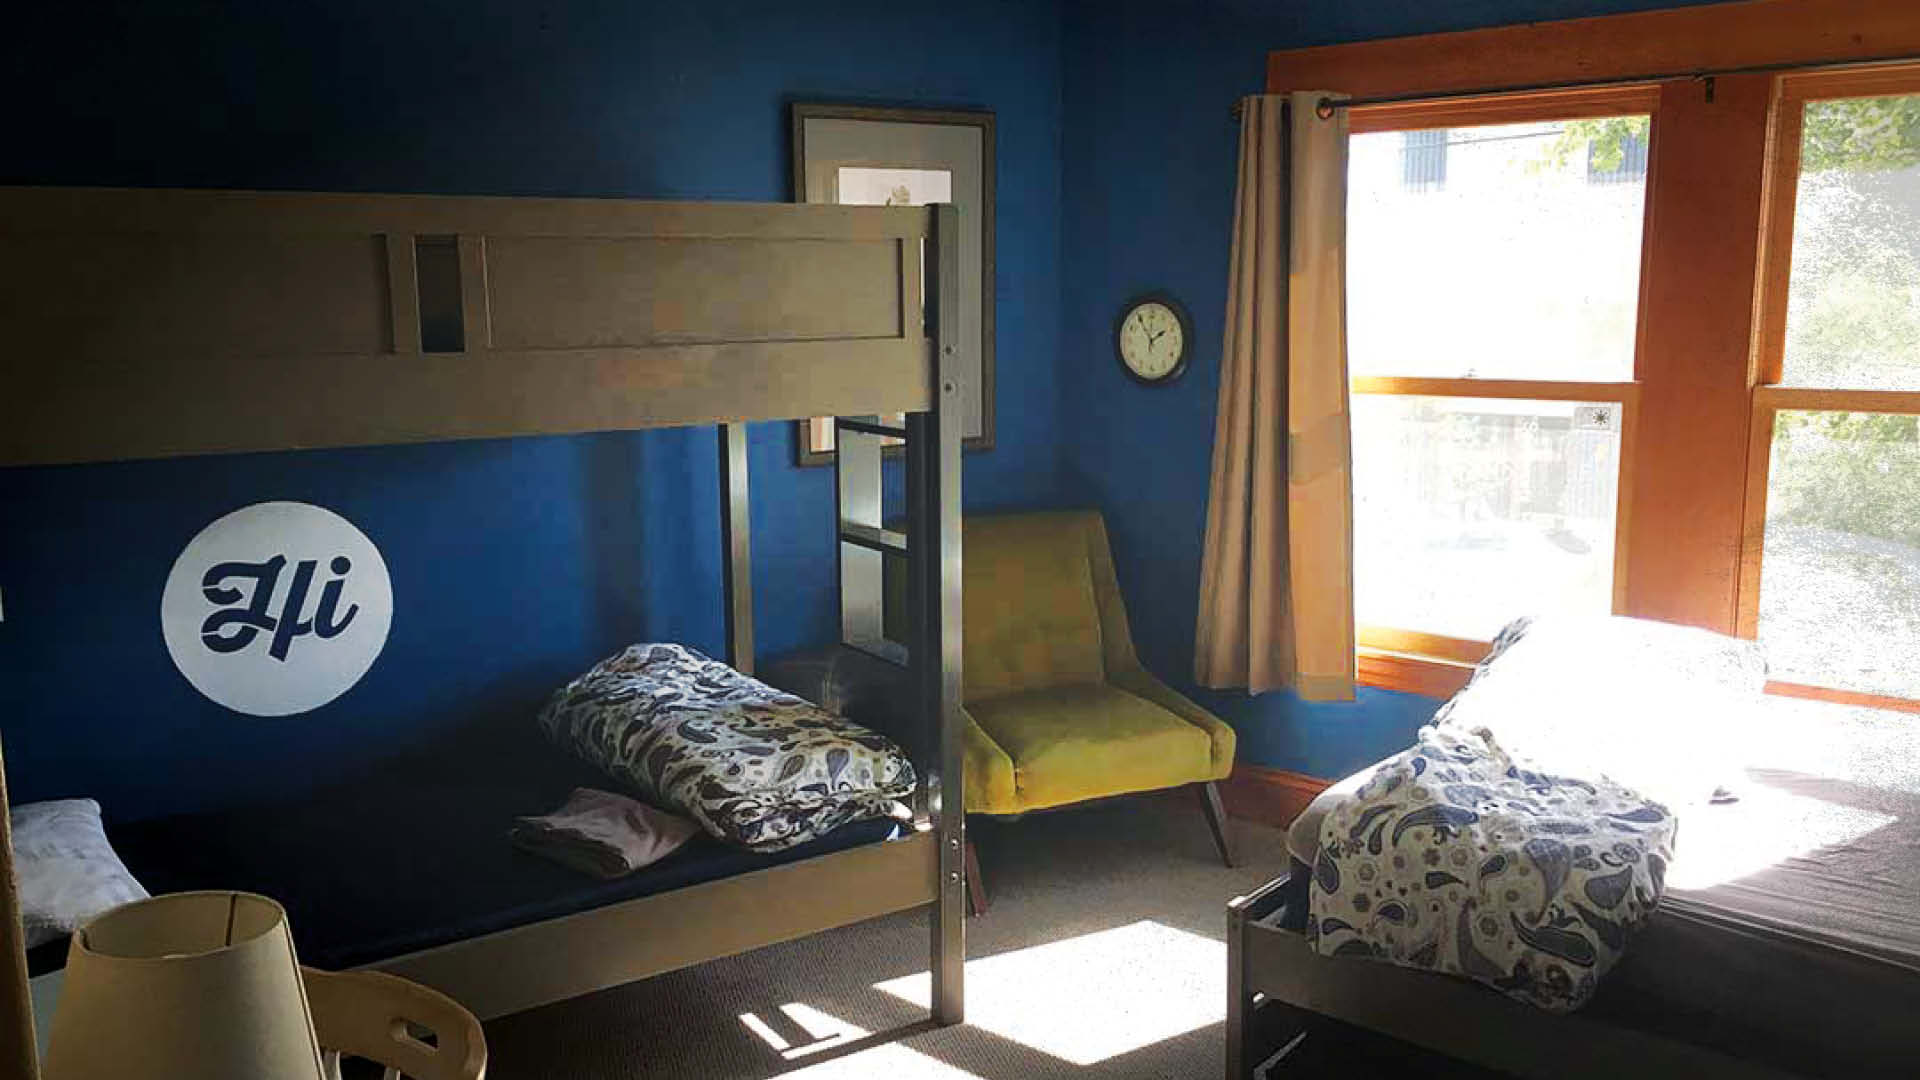 A private hostel room in Portland